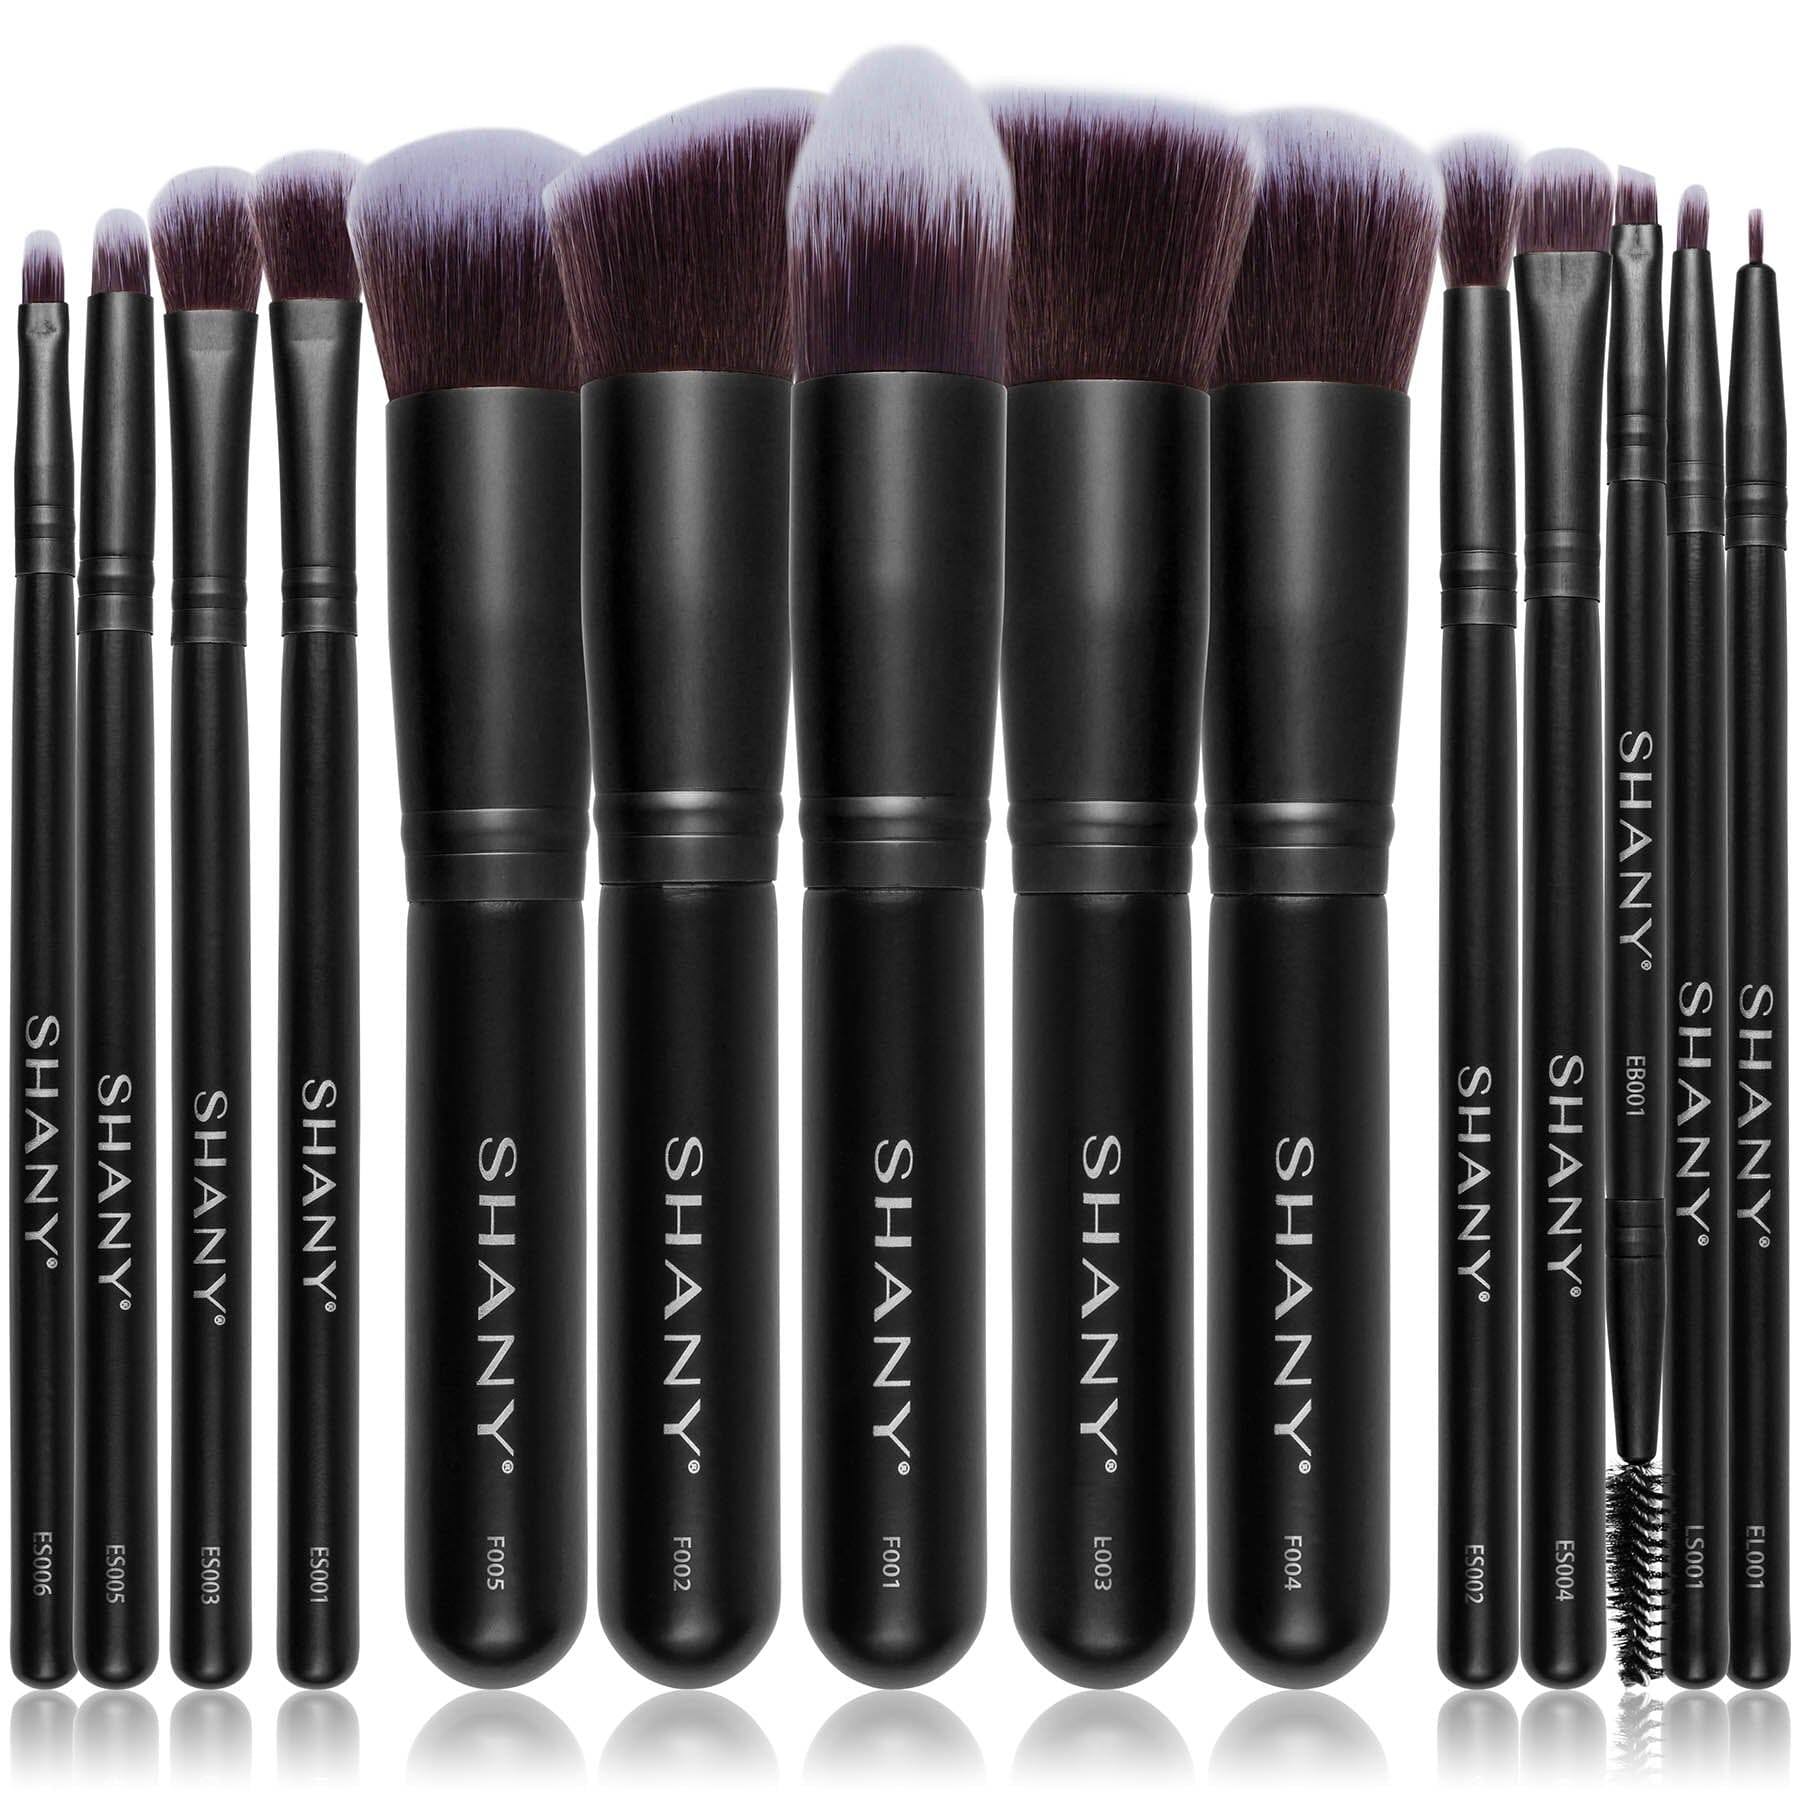 Kit 14 Brushes - 14 pennelli Makeup VIP MAKEUP – Vip Coiffeur